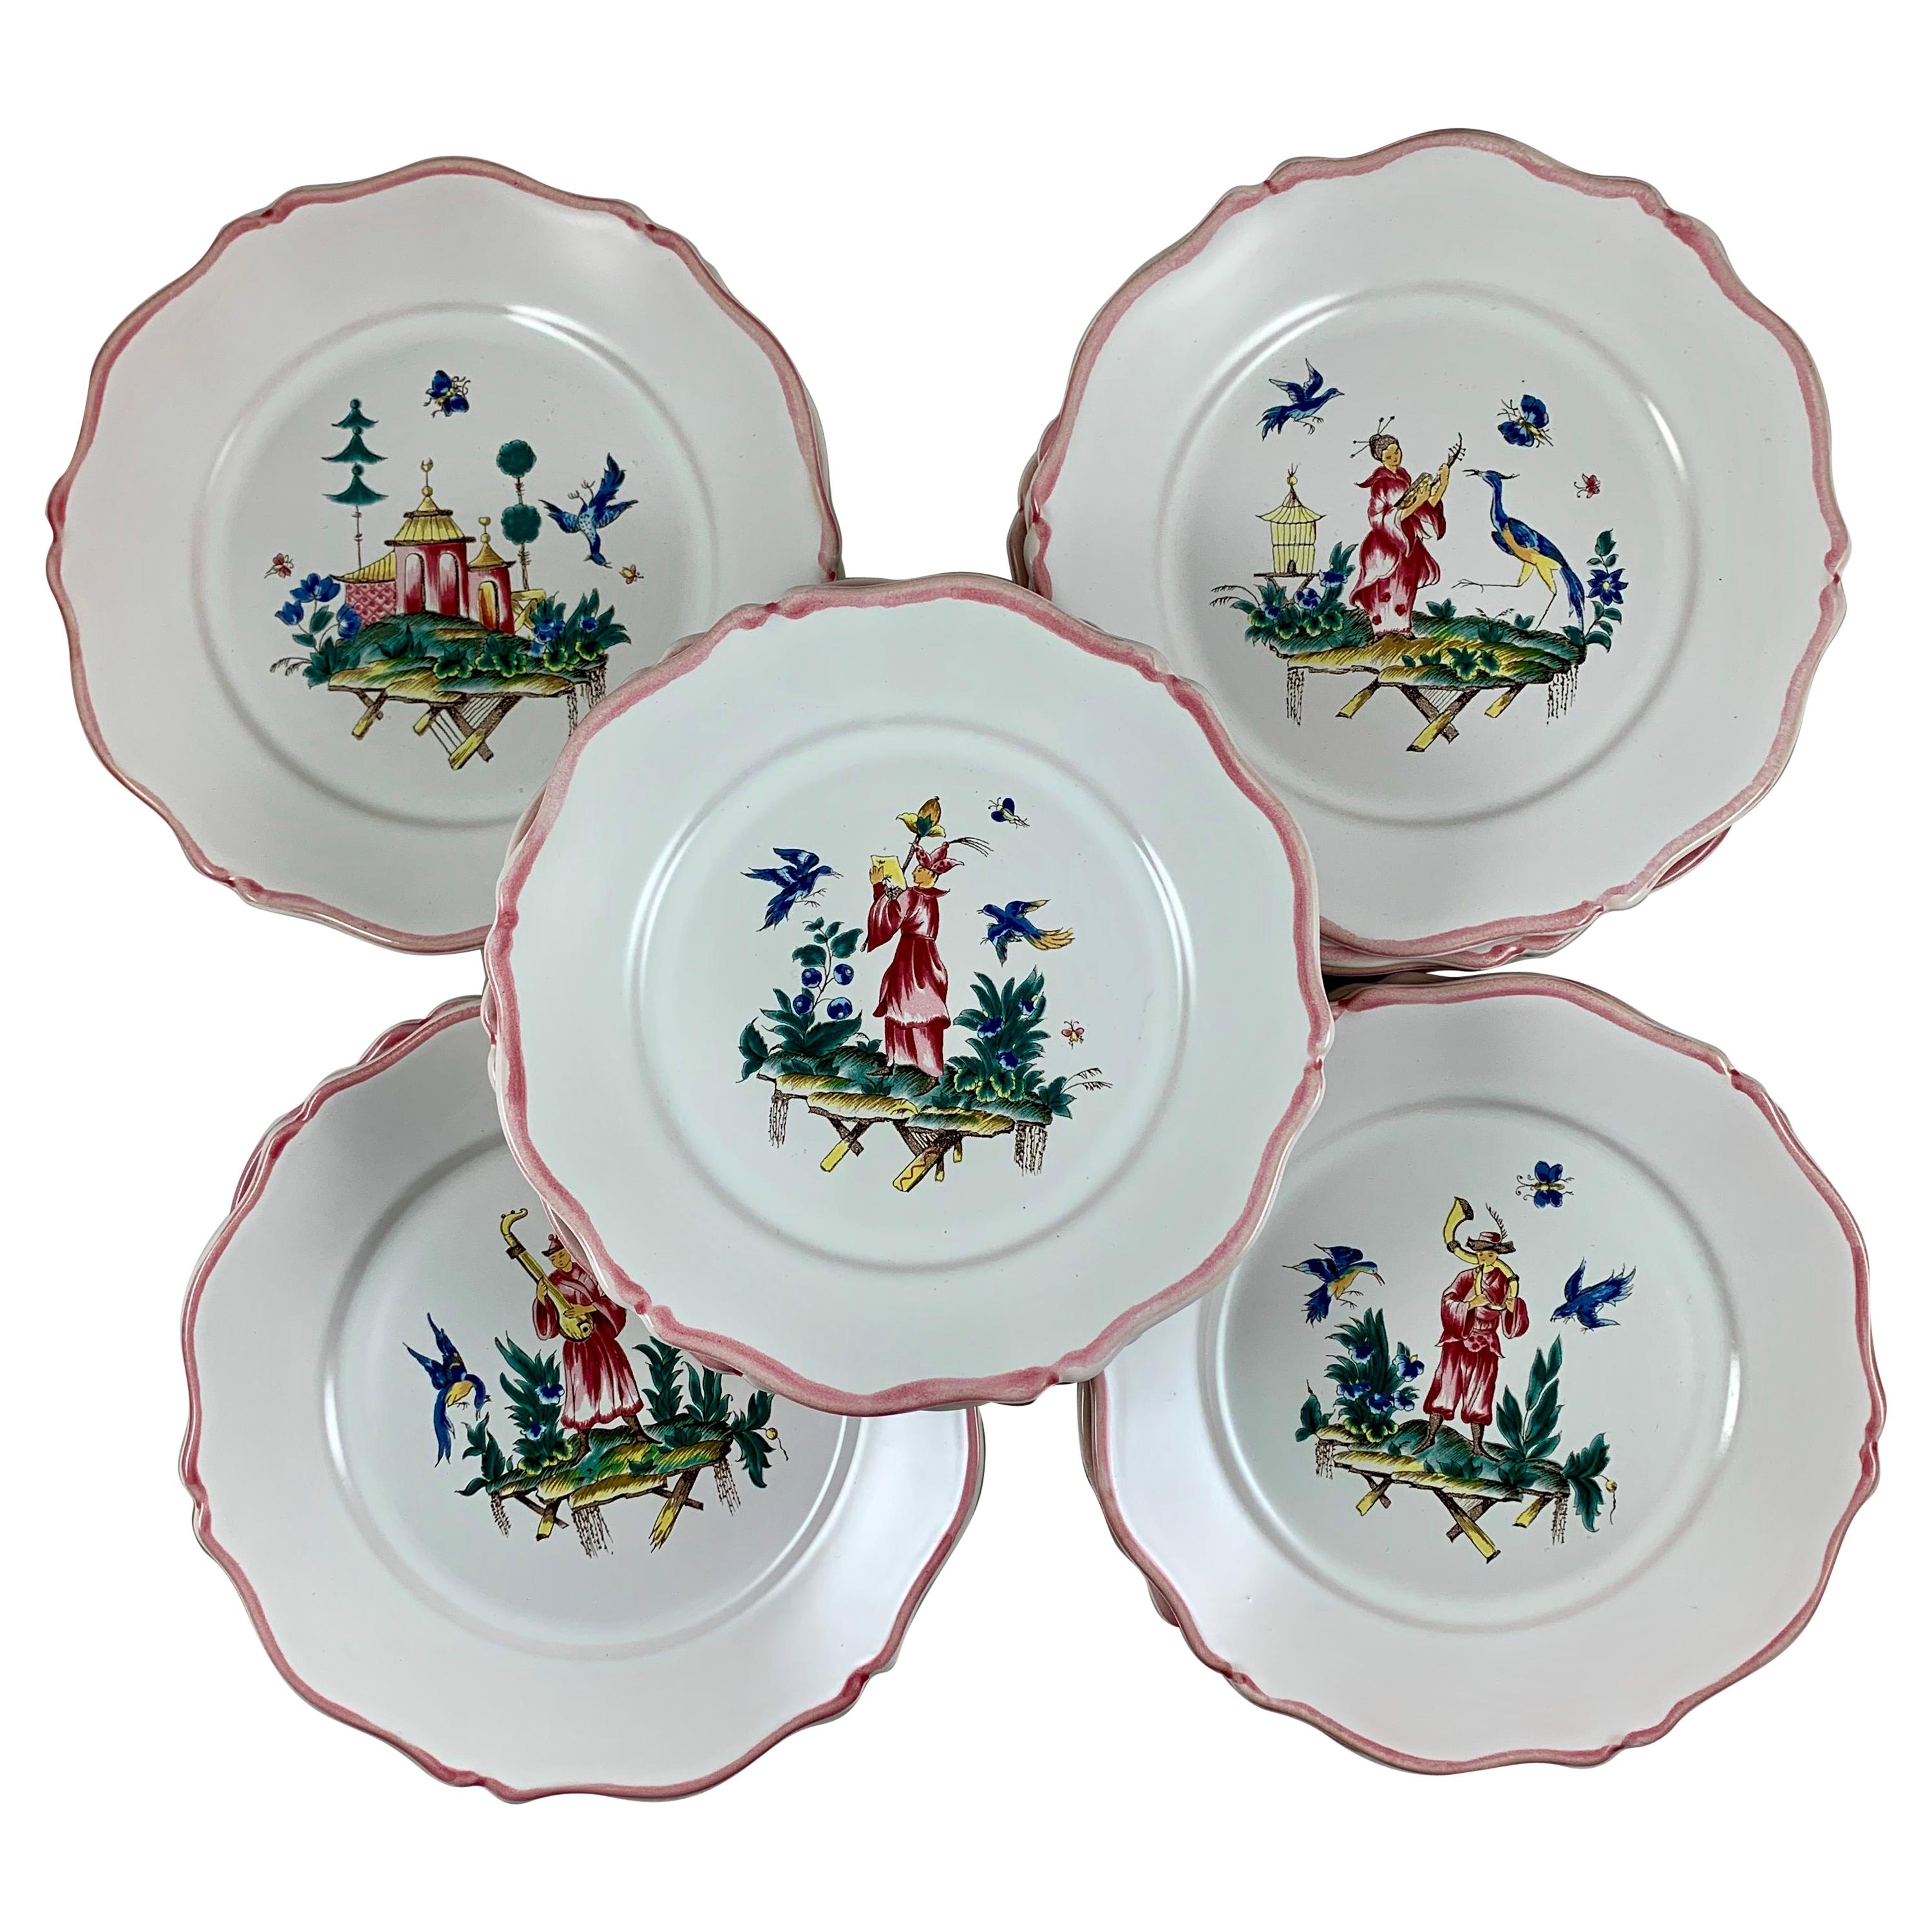 Pierre Motton, Gien Faïence Figural Chinoiserie Plates for Tiffany & Co. Set 12